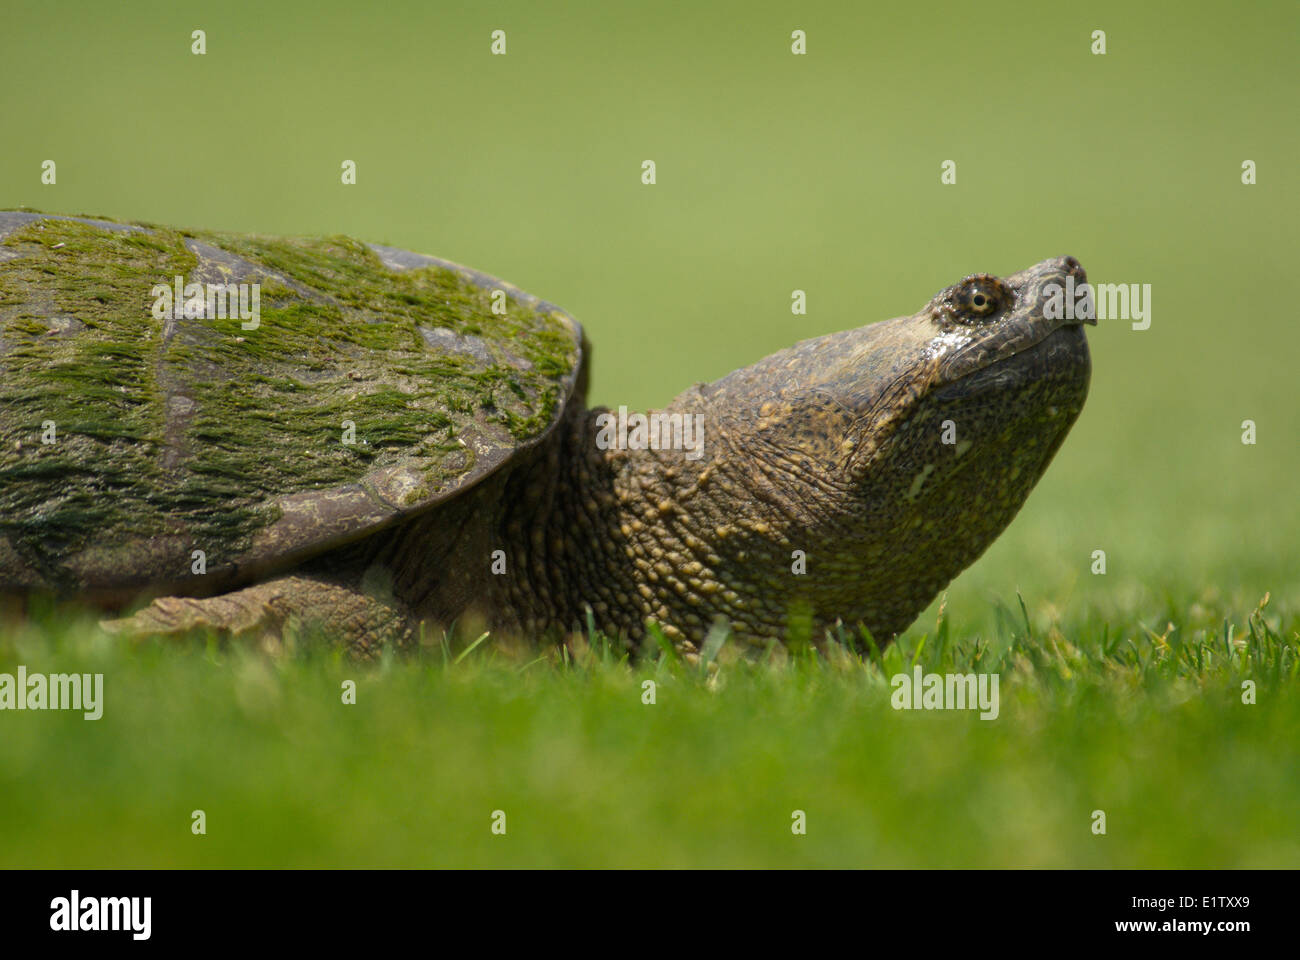 Close up of a Snapping Turtle near Orillia, Ontario Stock Photo